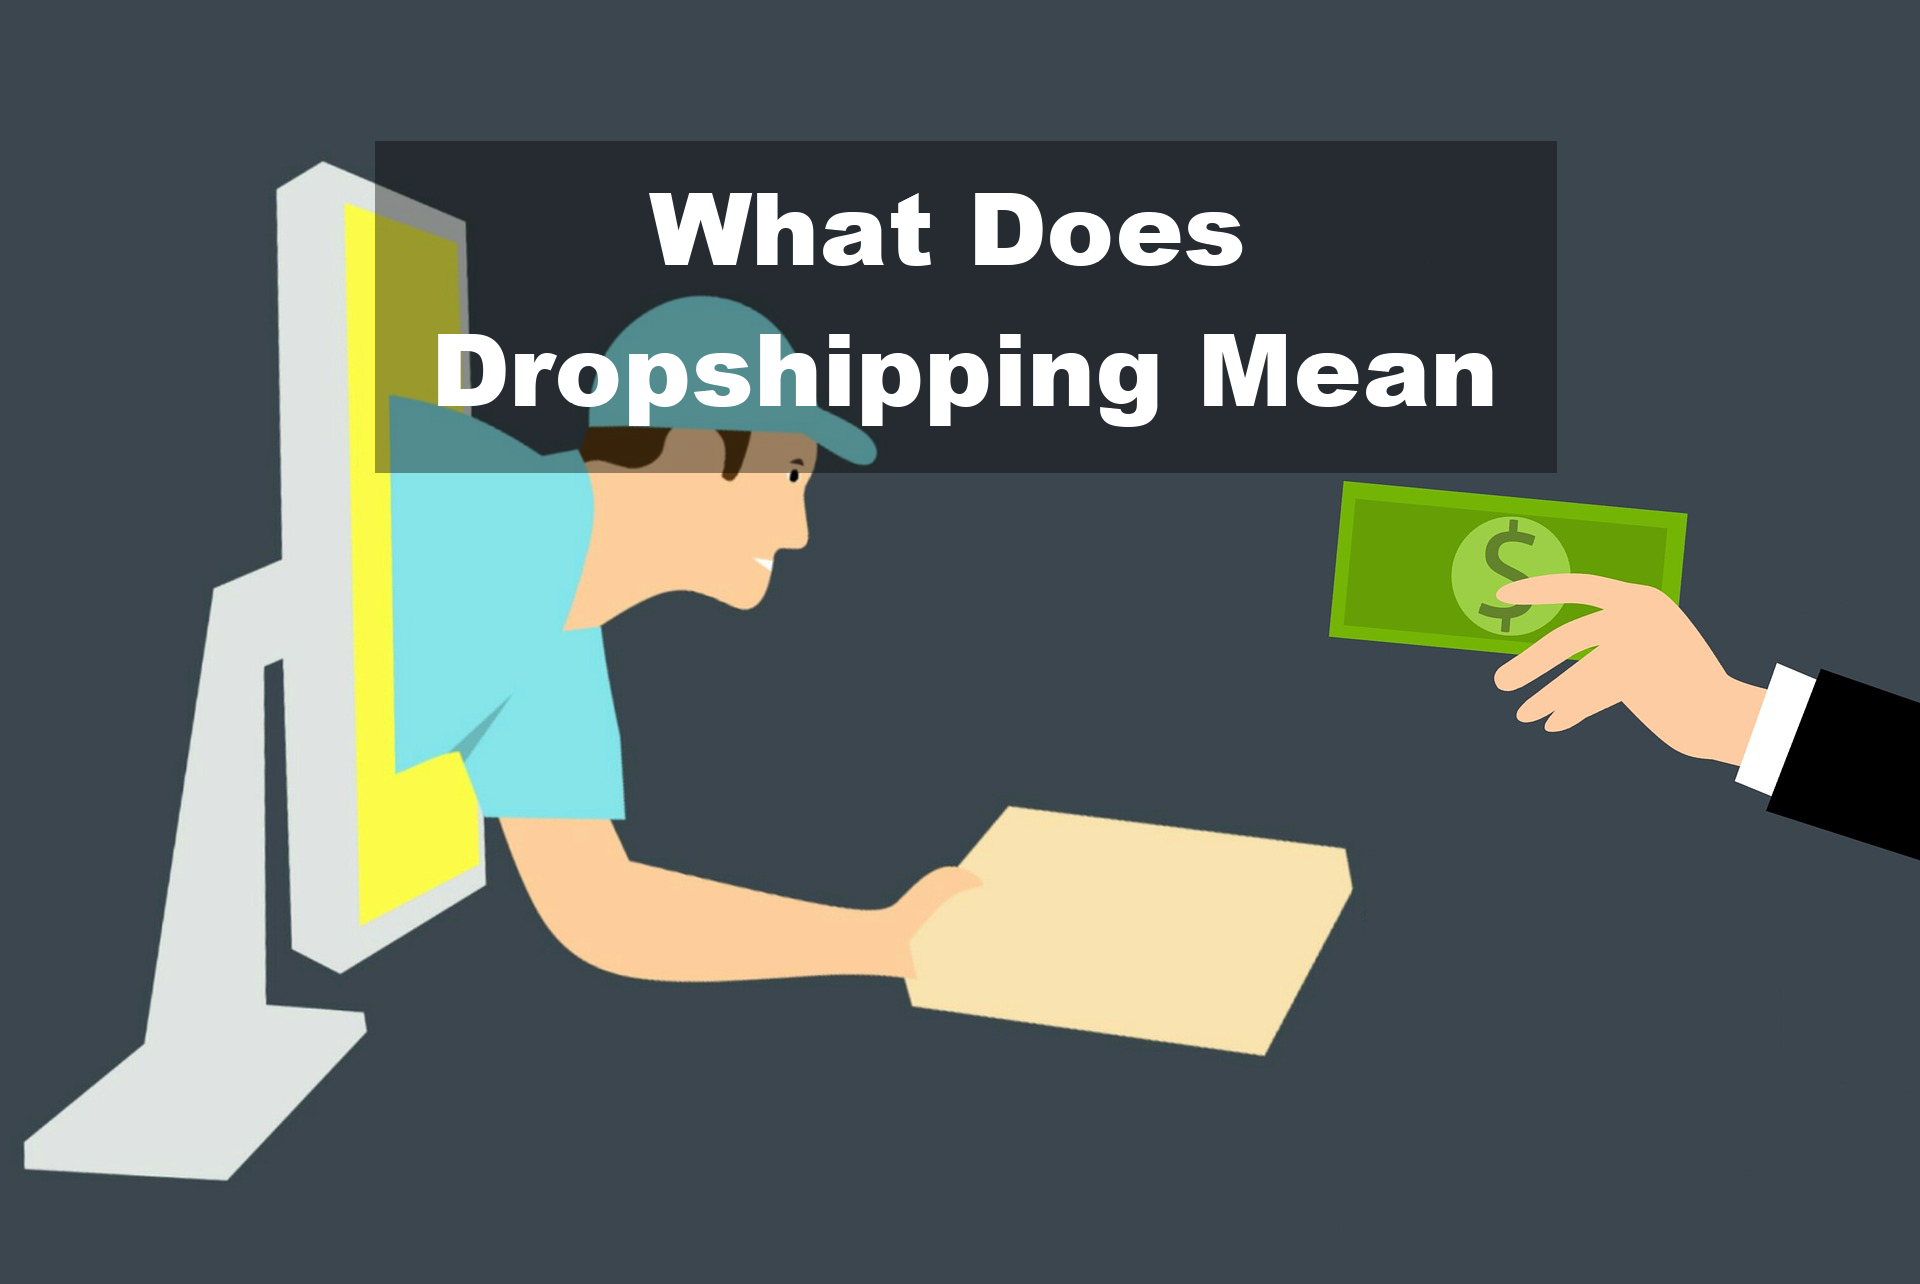 What Does Dropshipping Mean